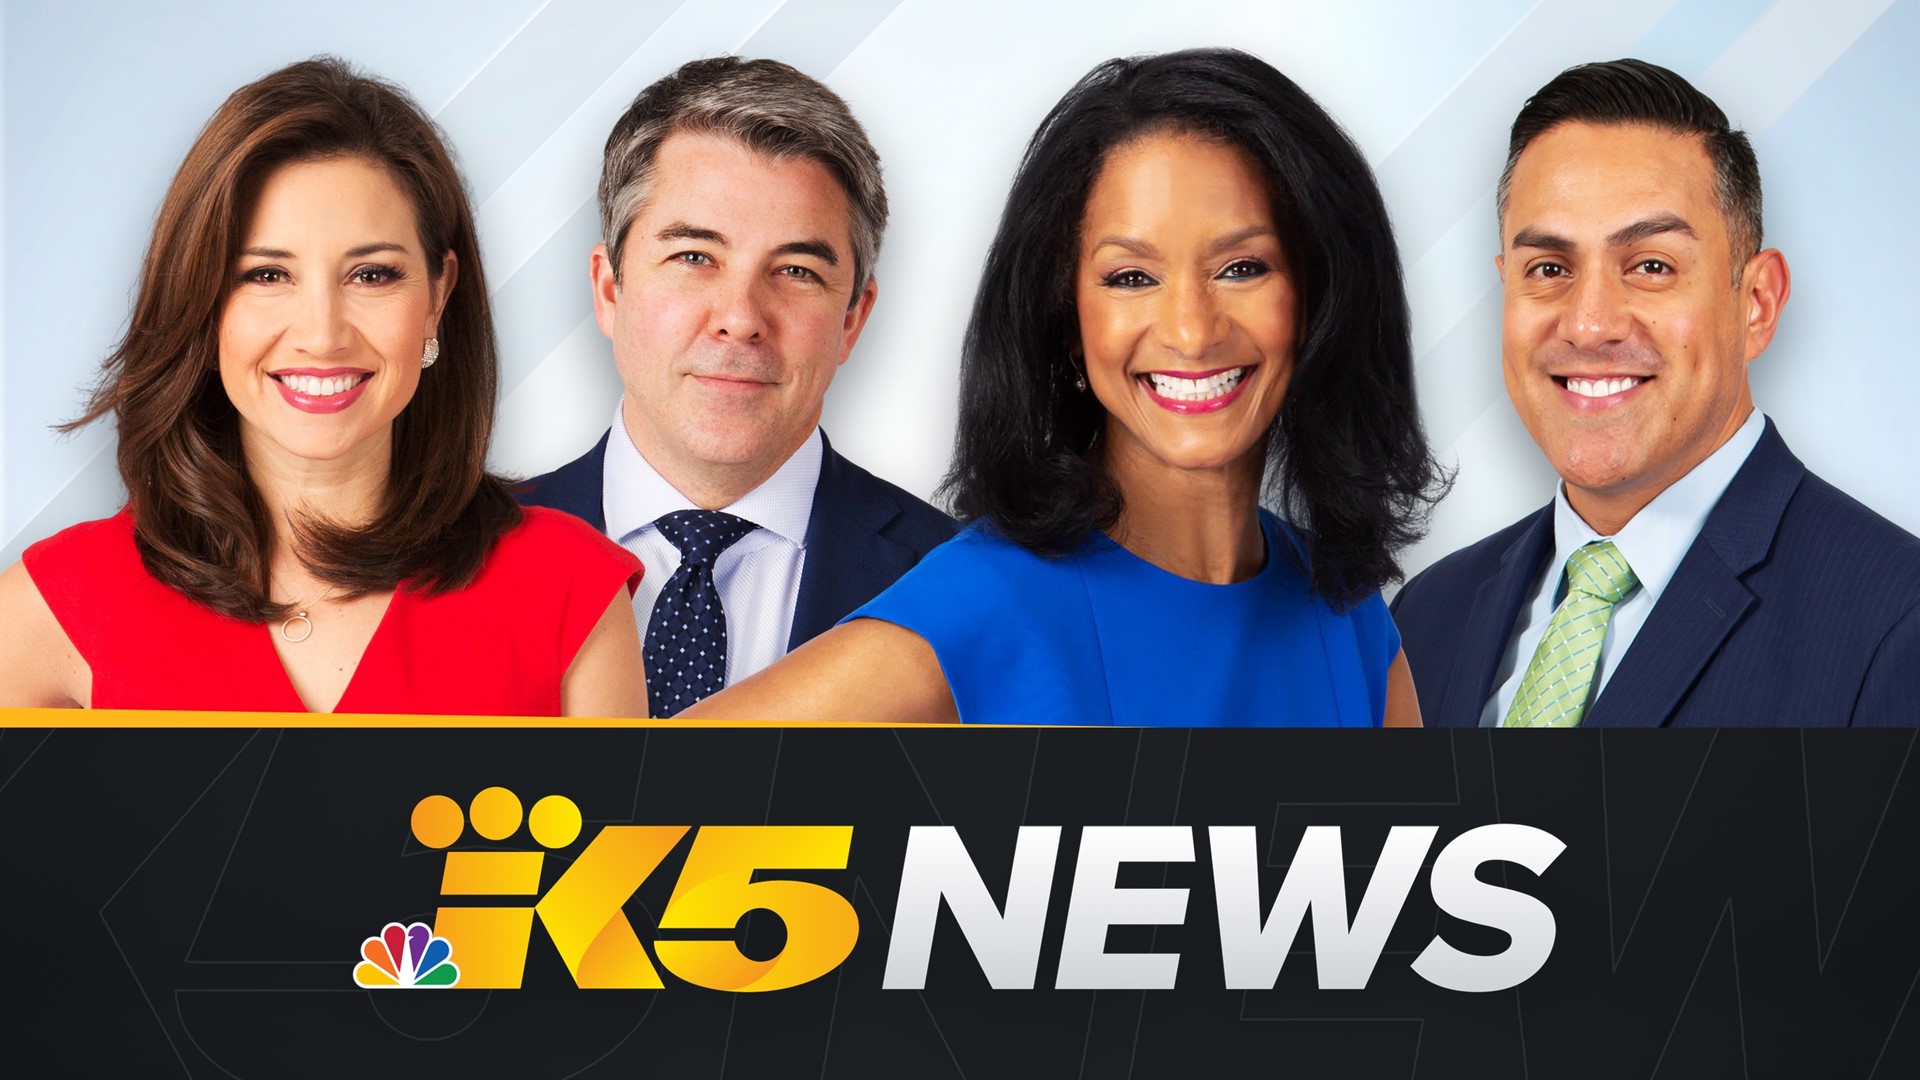 The KING 5 News Team provides the latest on the major news events of the day impacting western Washington along with the latest weather, traffic and sports updates.
